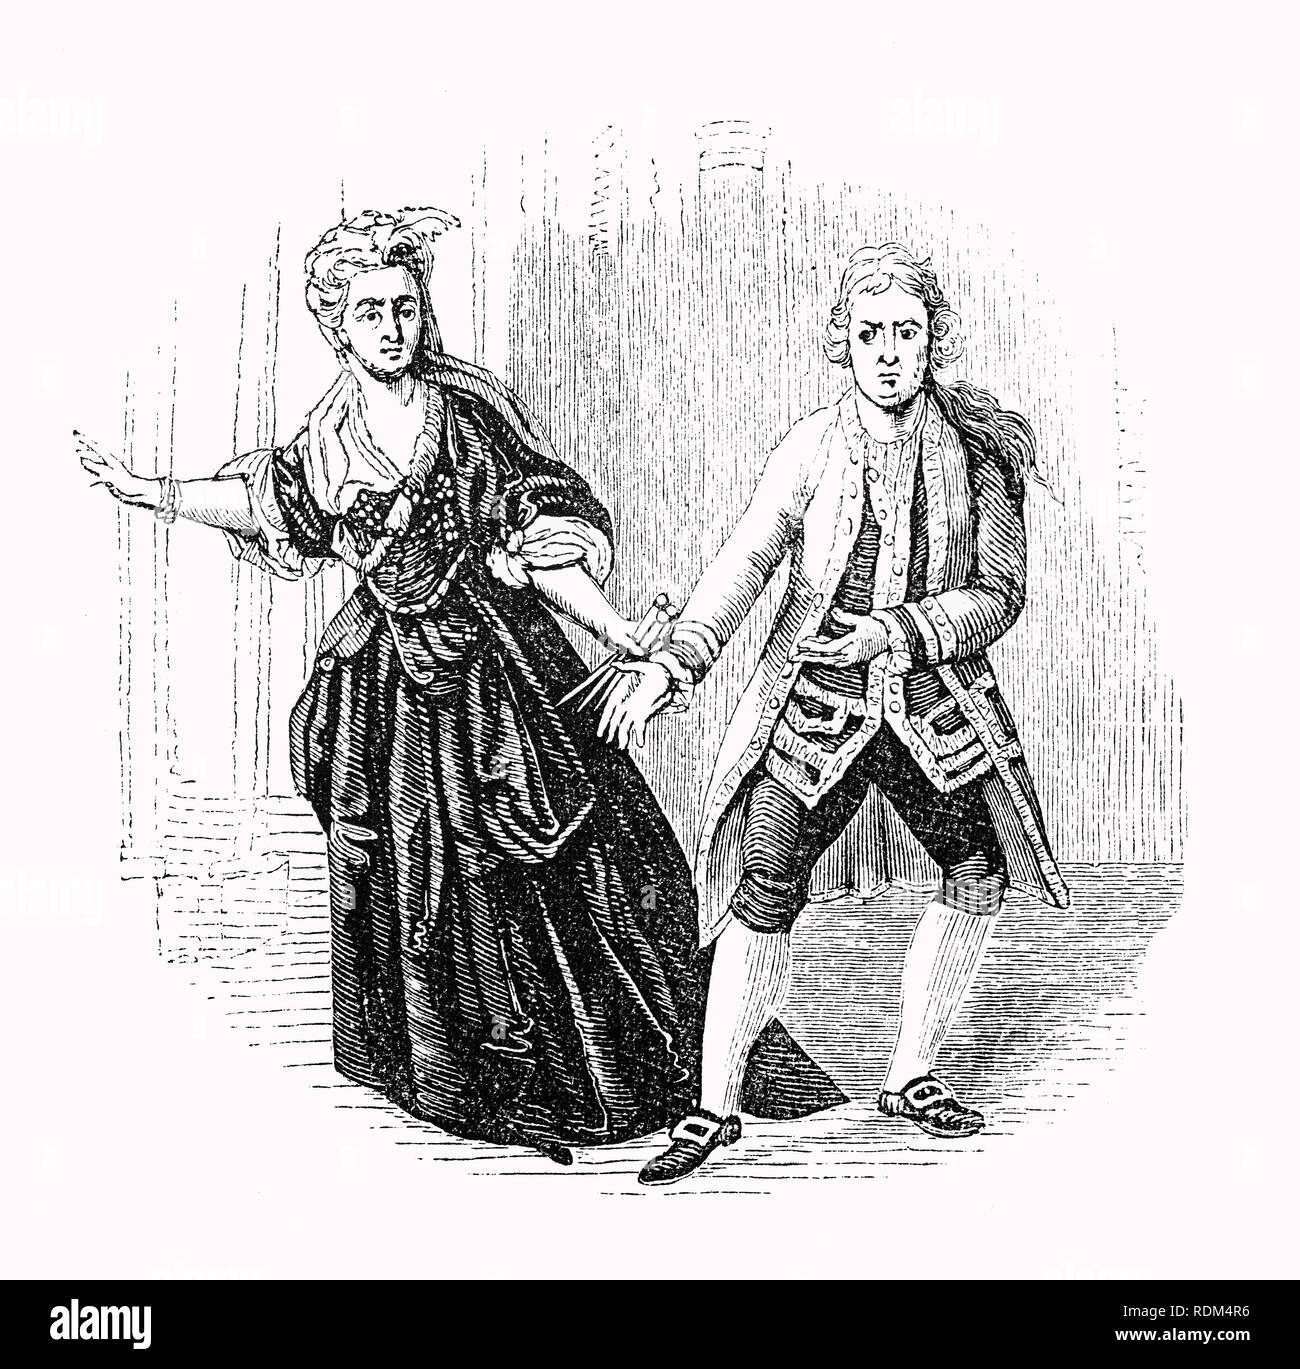 David Garrick (1717-1779), English actor, playwright, theatre manager and producer performing in MacBeth. He went on to influence nearly all aspects of theatrical practice throughout the 18th century, and was a pupil and friend of Dr Samuel Johnson. He appeared in a number of amateur theatricals, and with his appearance in the title role of Shakespeare's Richard III, audiences and managers began to take notice. Stock Photo